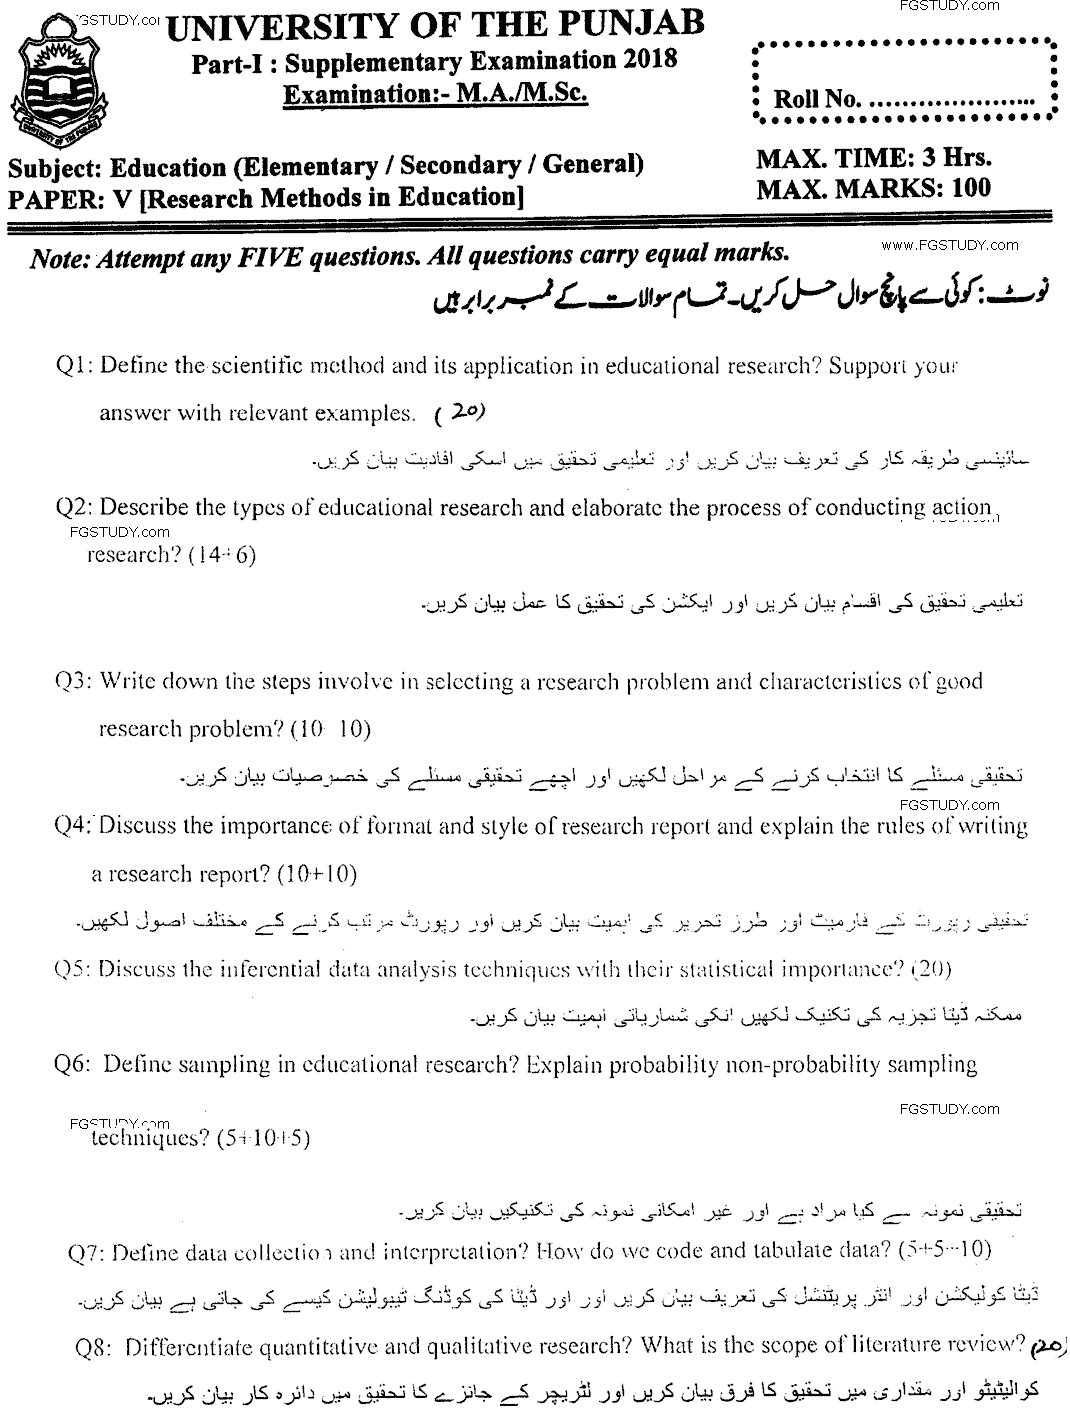 Ma Part 1 Education Elementary Research Methods In Education Past Paper 2018 Punjab University